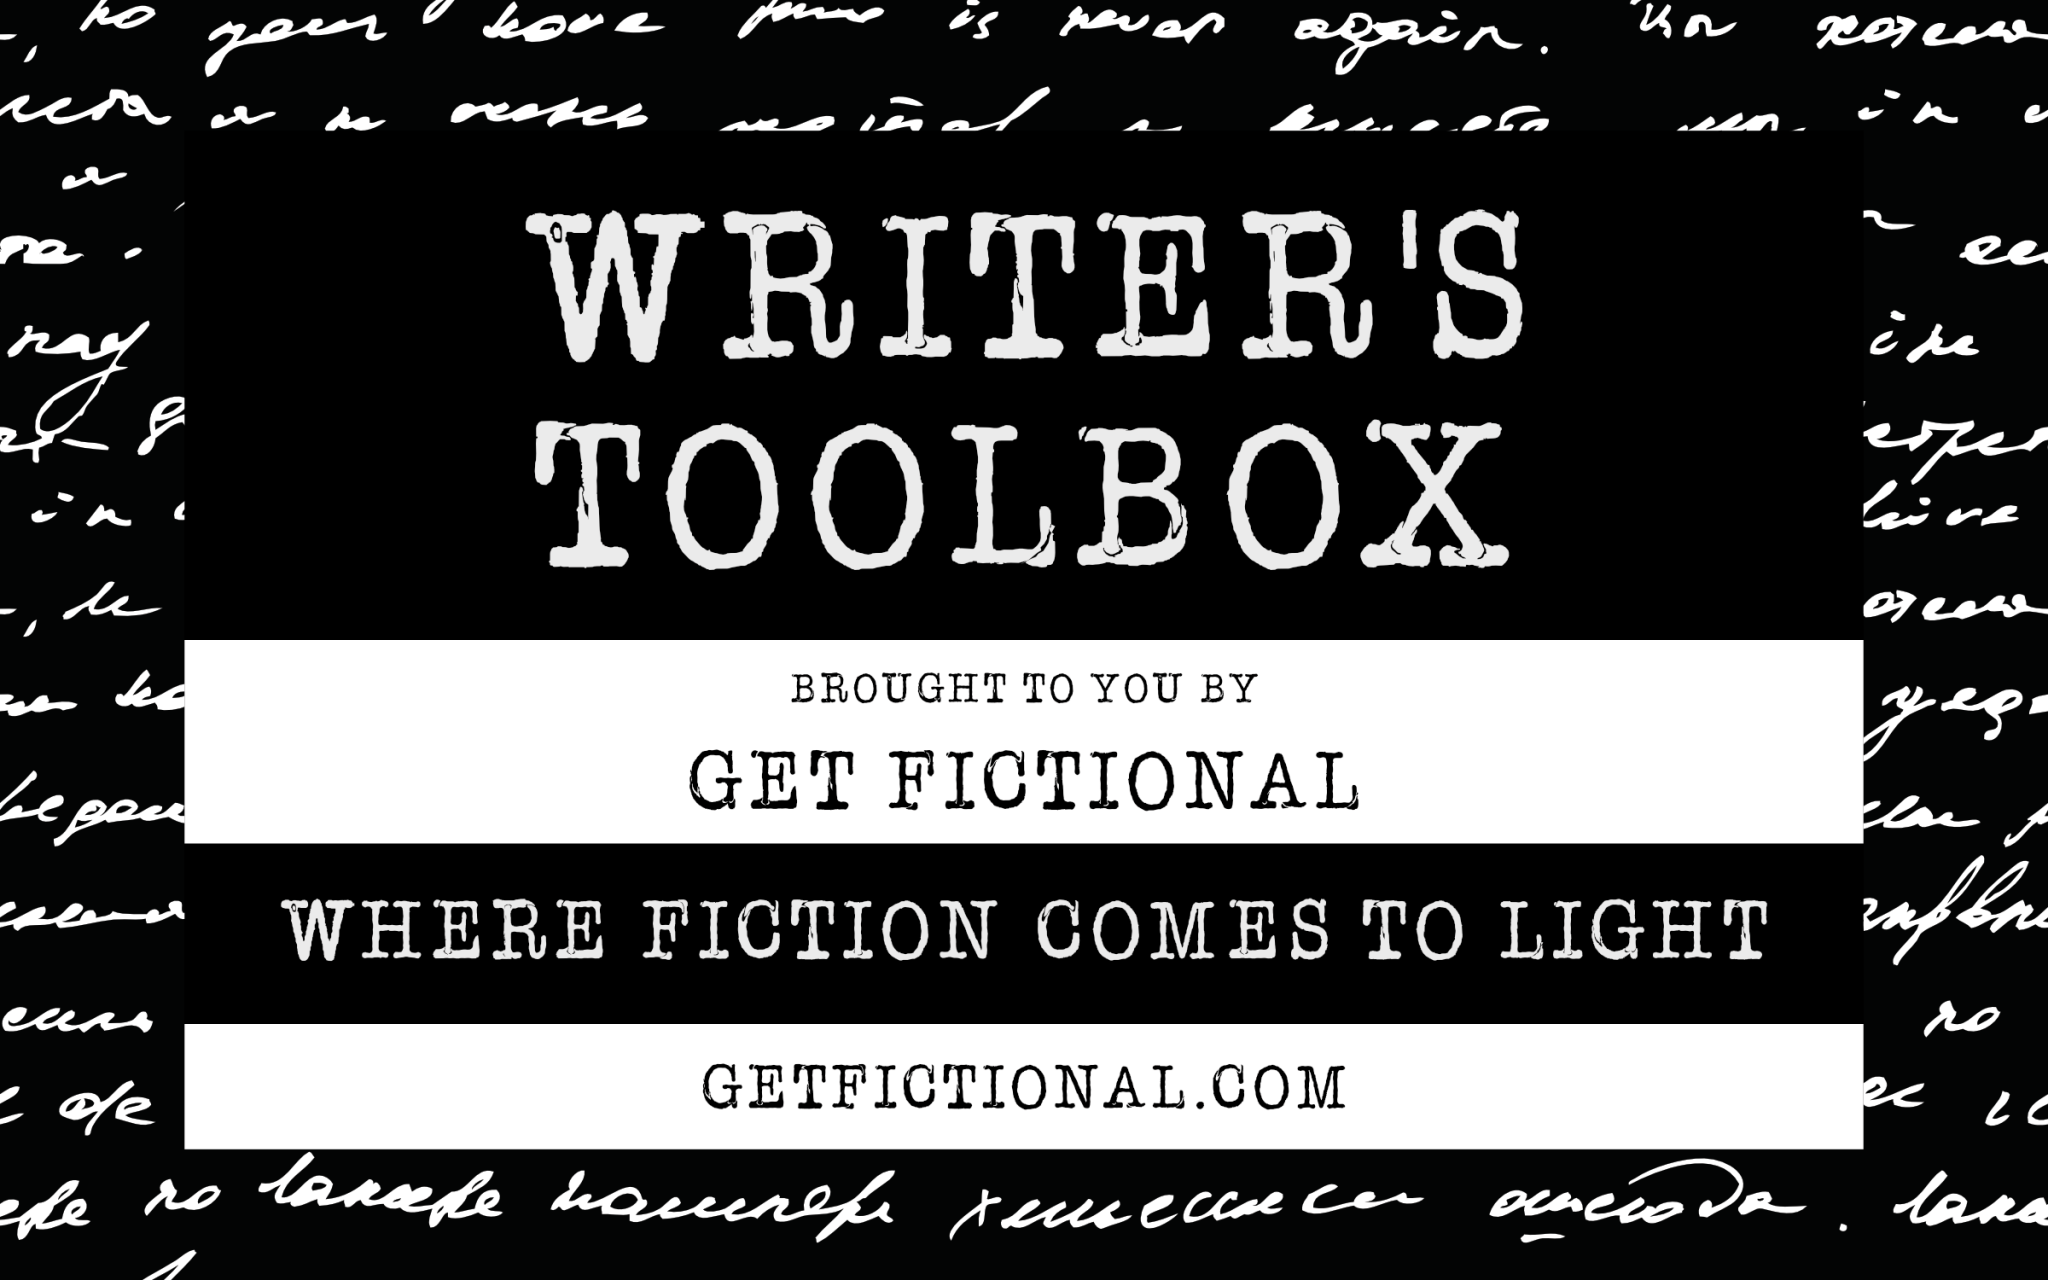 The Writer's Toolbox - Get Fictional